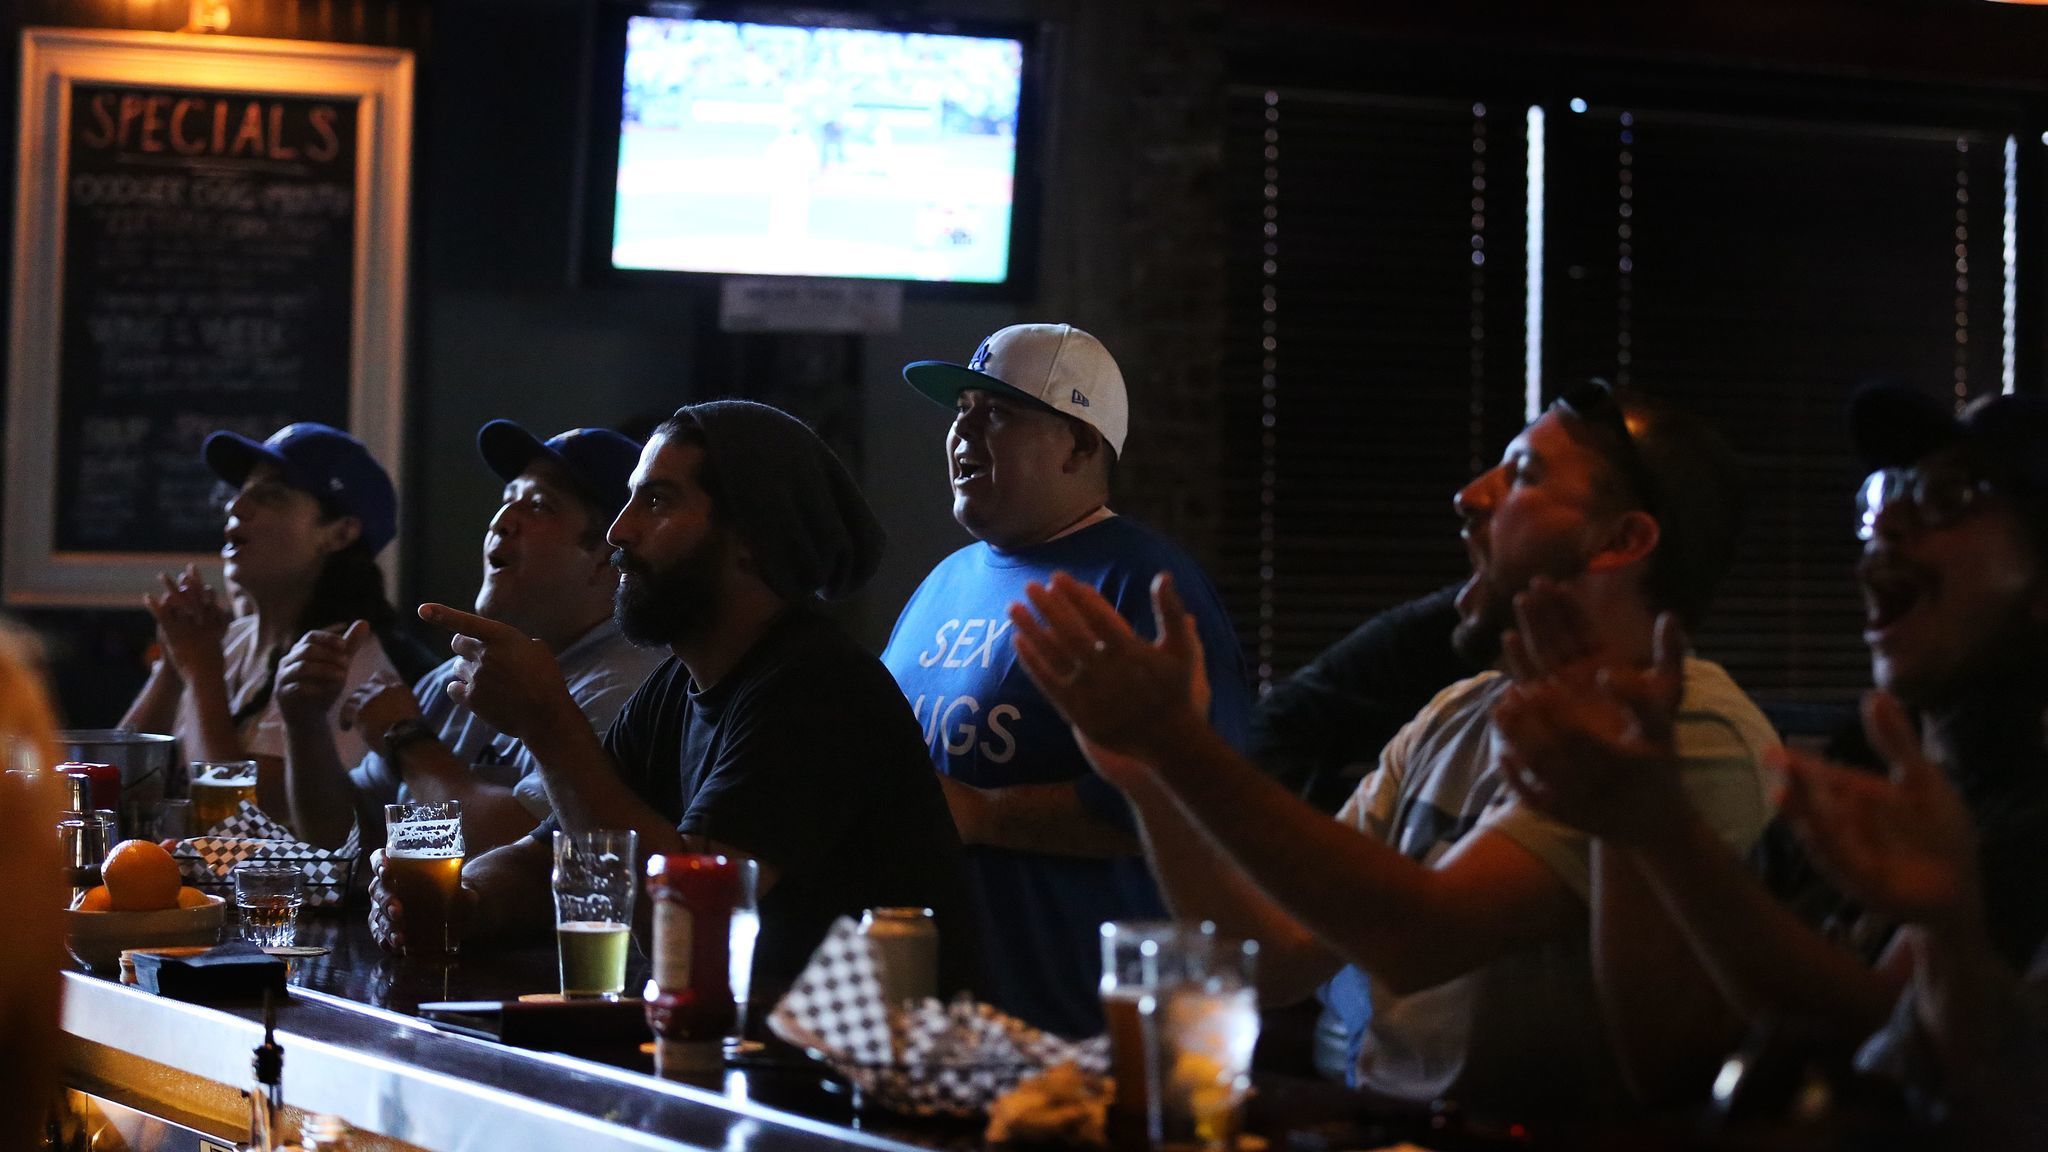 Fans enjoy a game and beers inside the Greyhound Bar & Grill in Los Angeles.